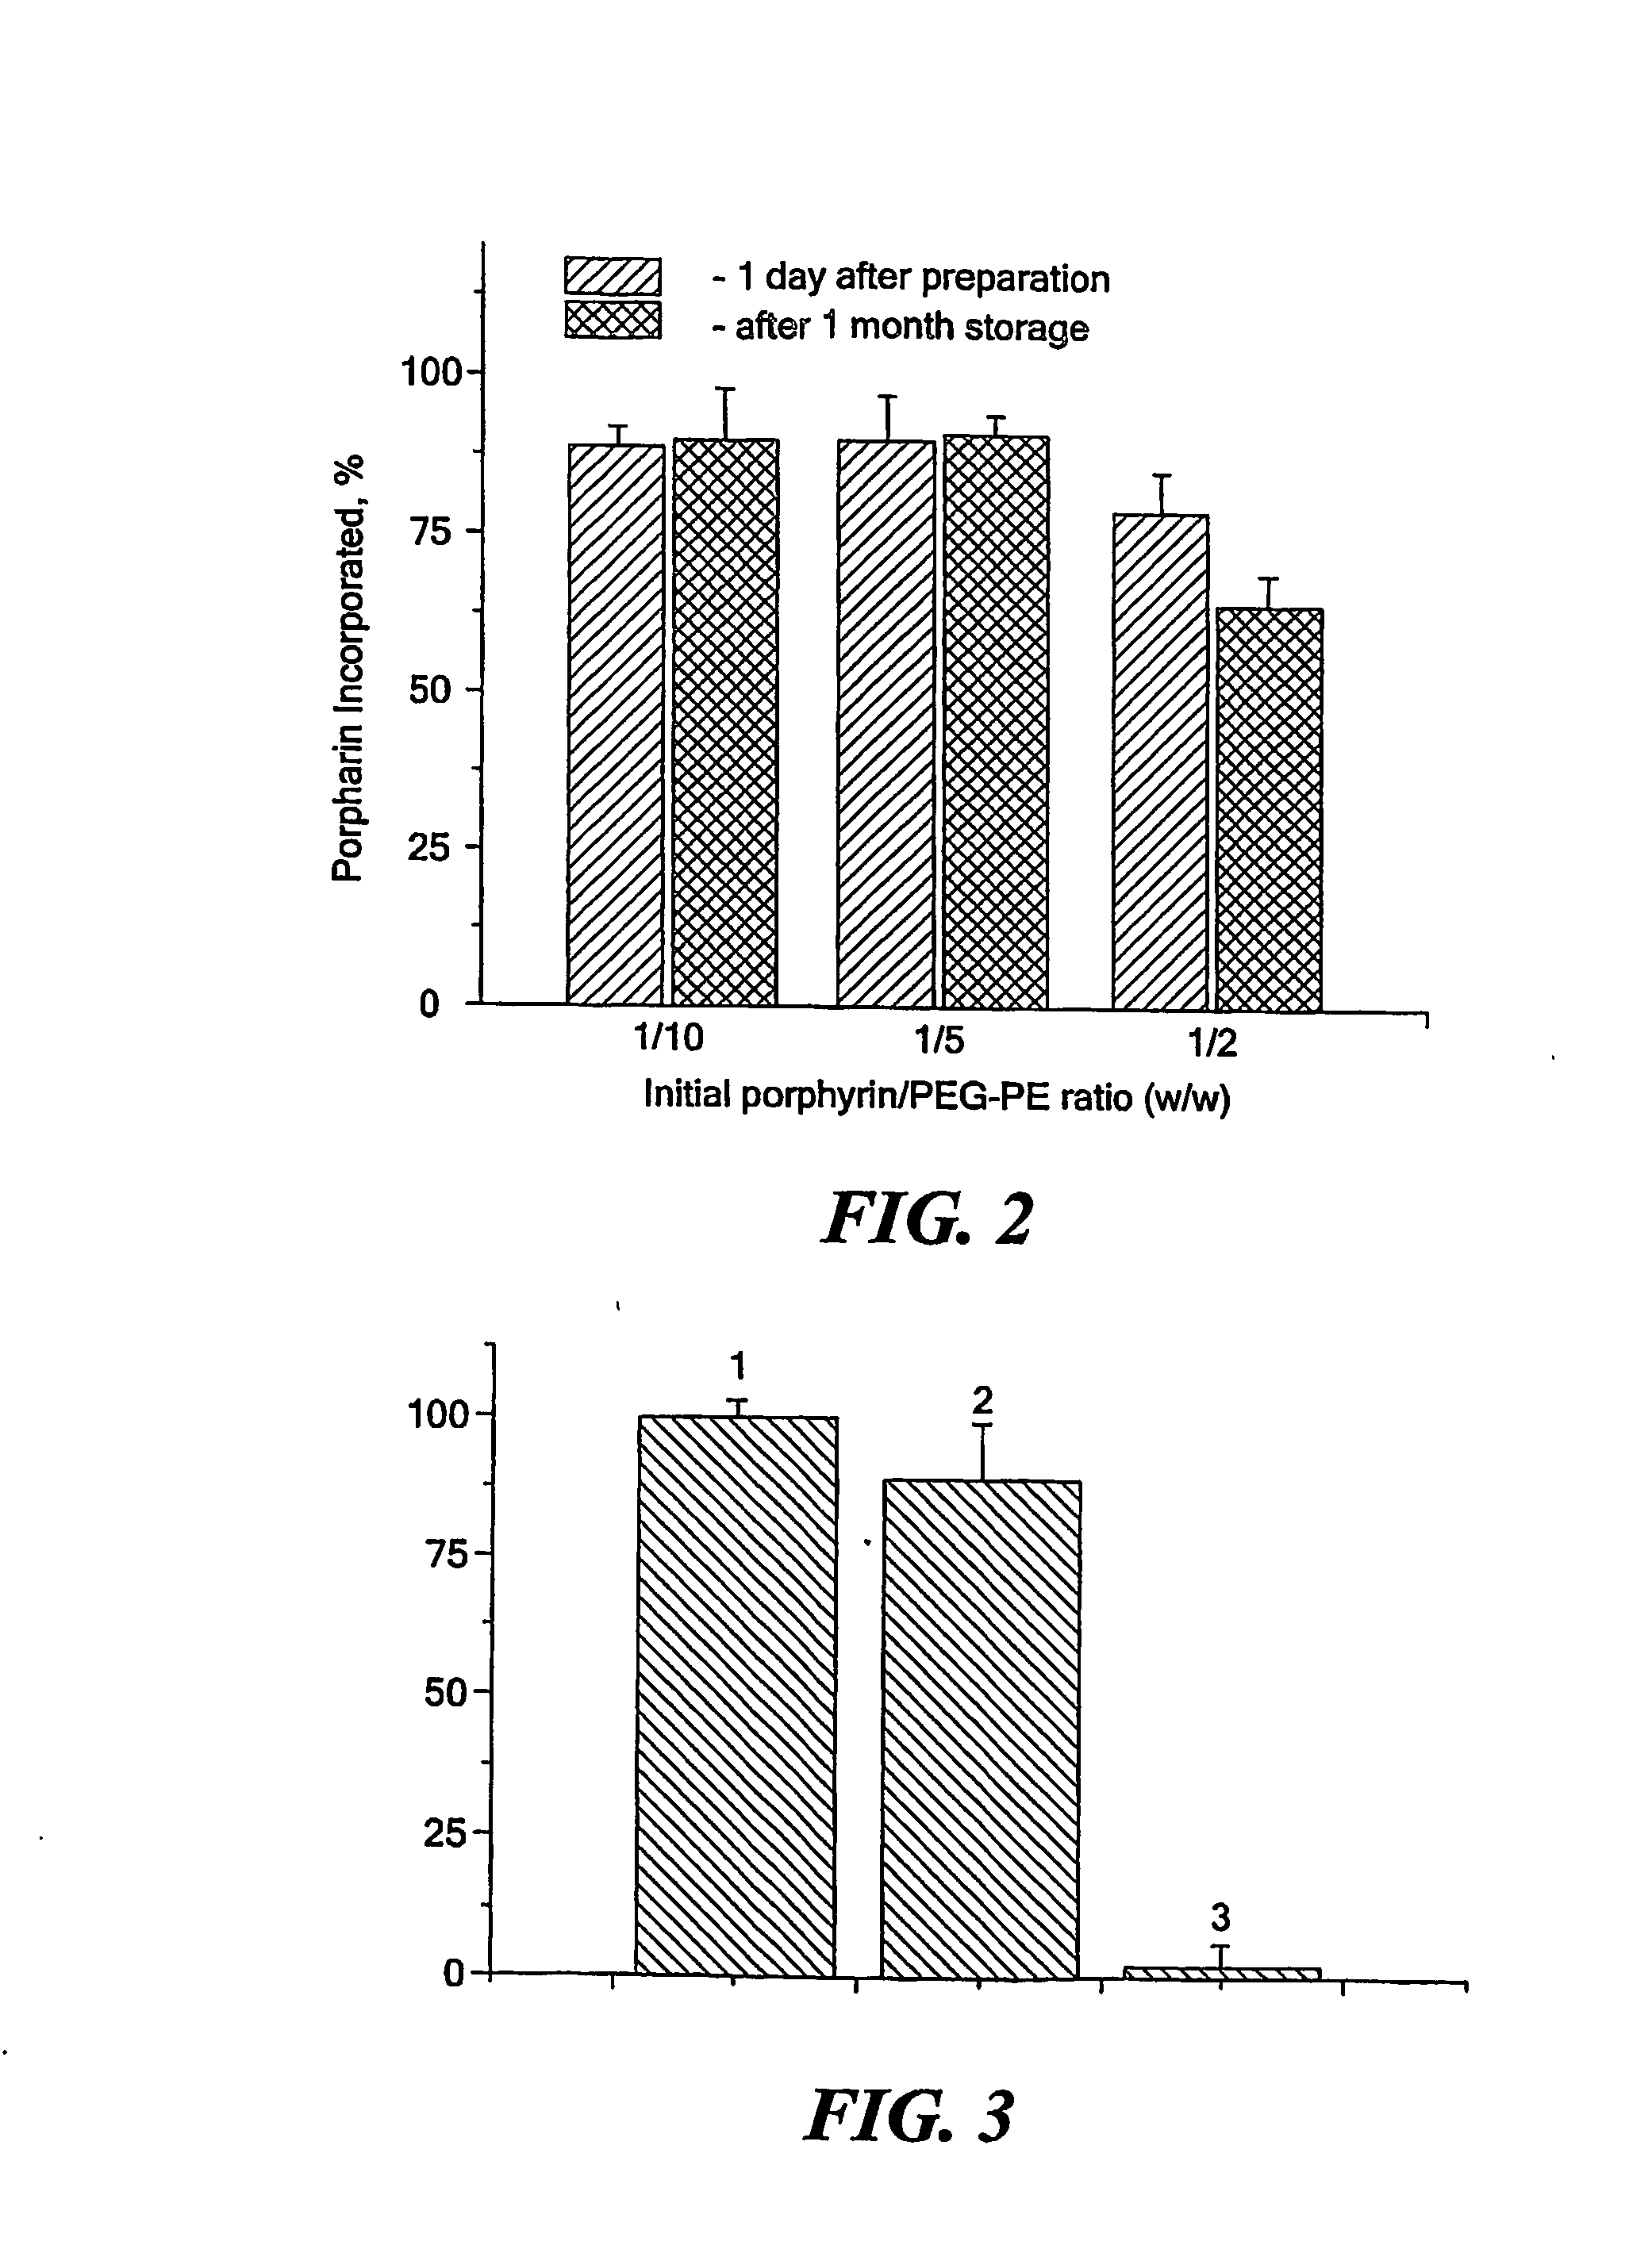 Micelle delivery system loaded with a pharmaceutical agent